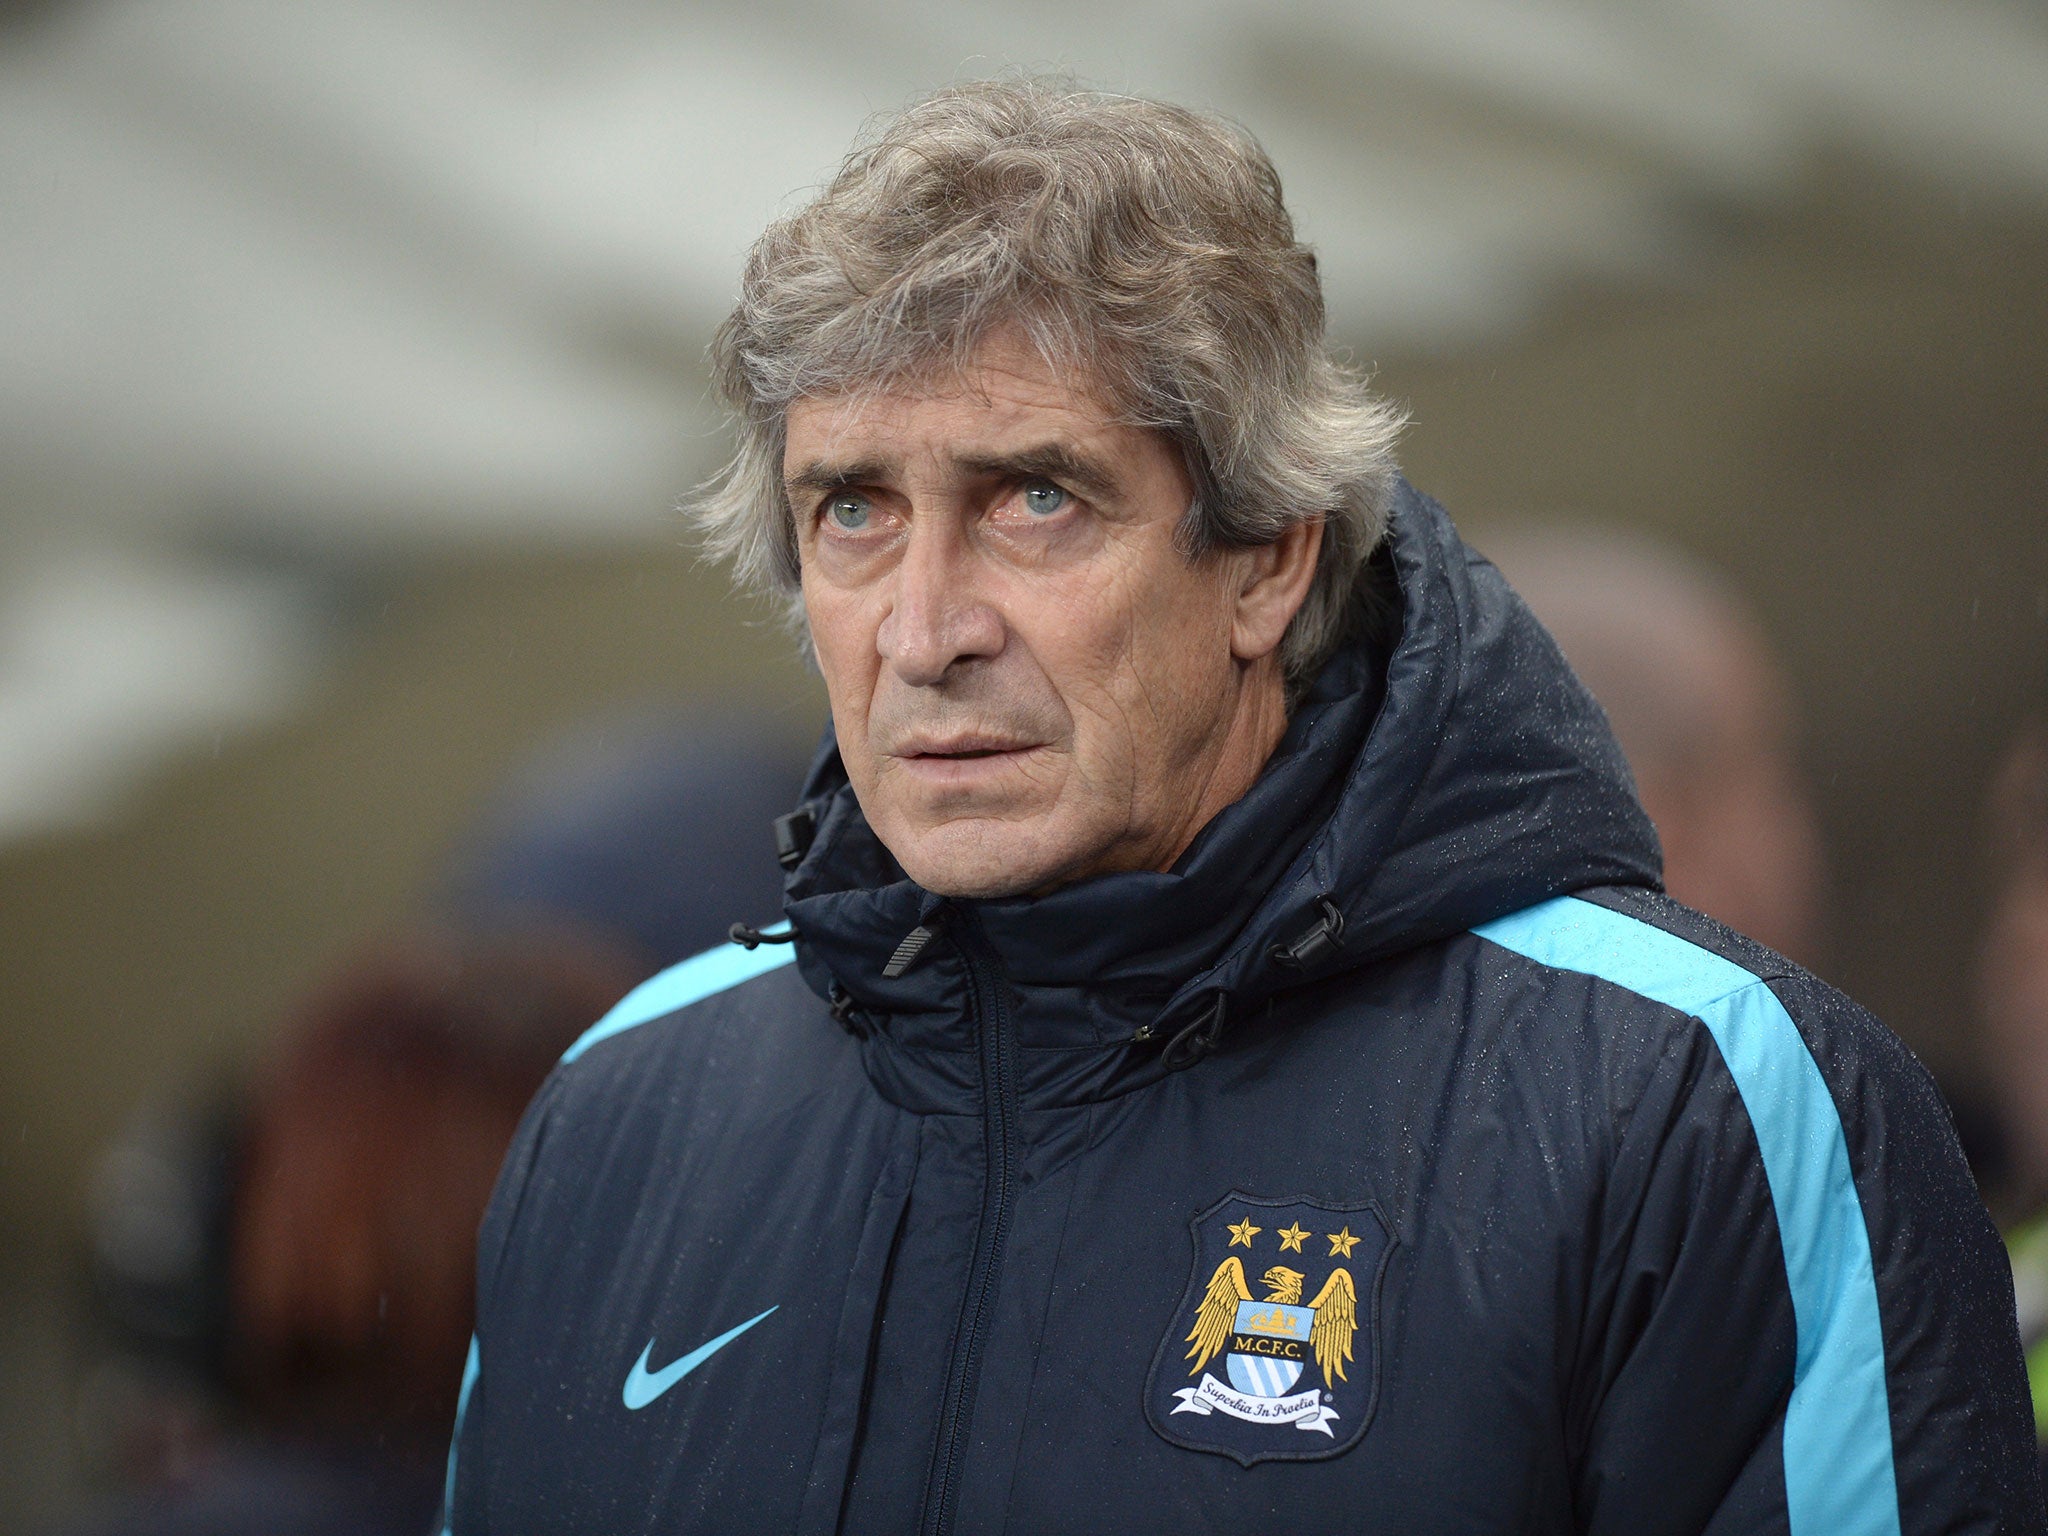 Manchester city manager Manuel Pellegrini is being linked with Chelsea